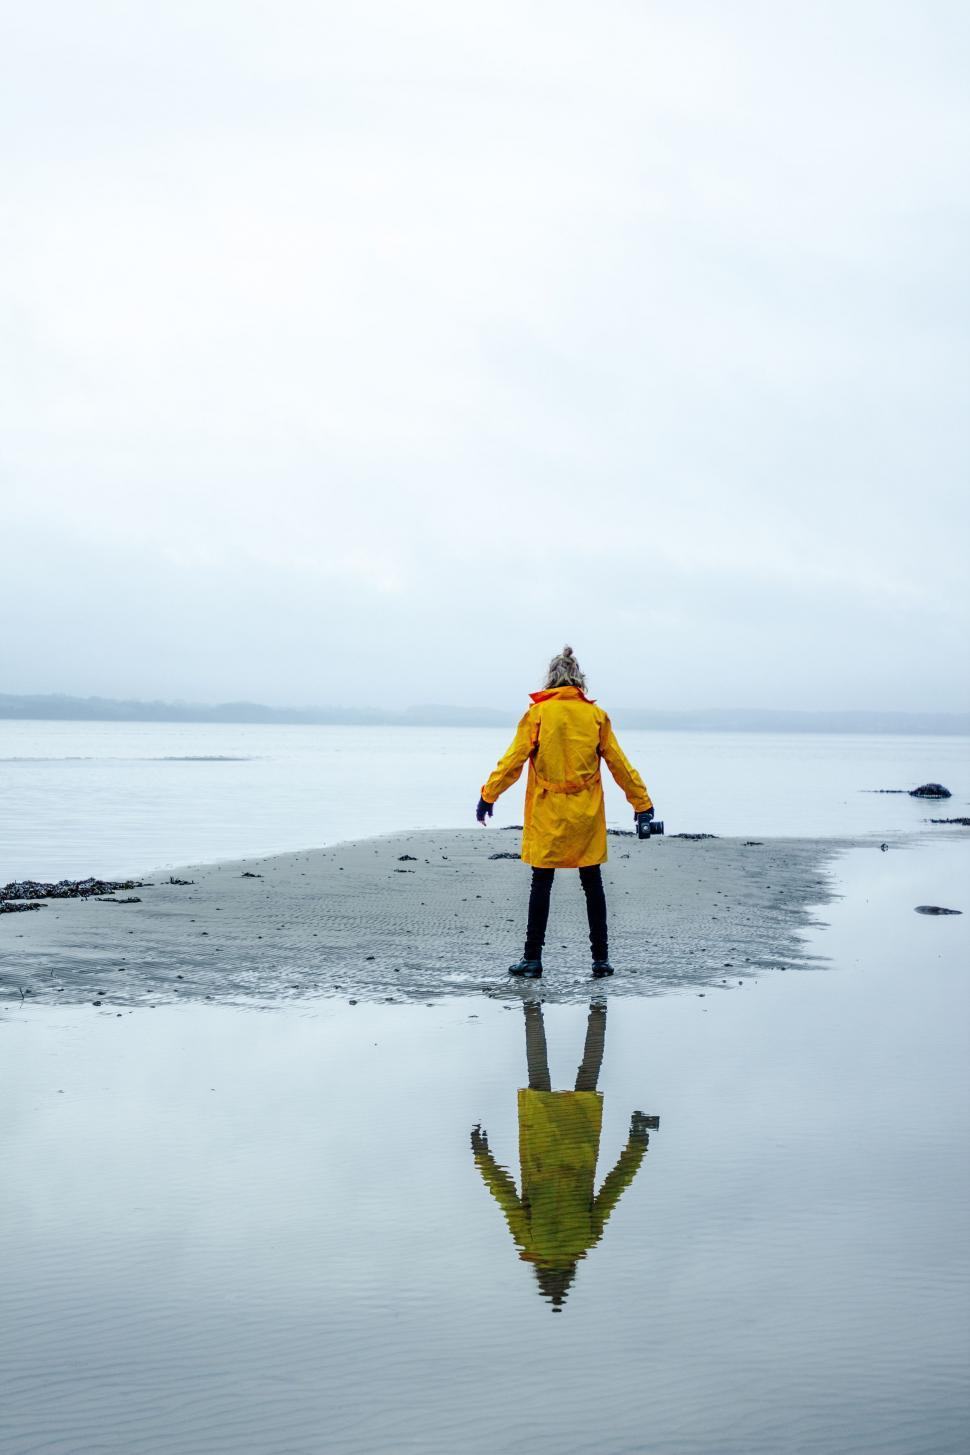 Free Image of Person in Yellow Jacket Standing on Beach 